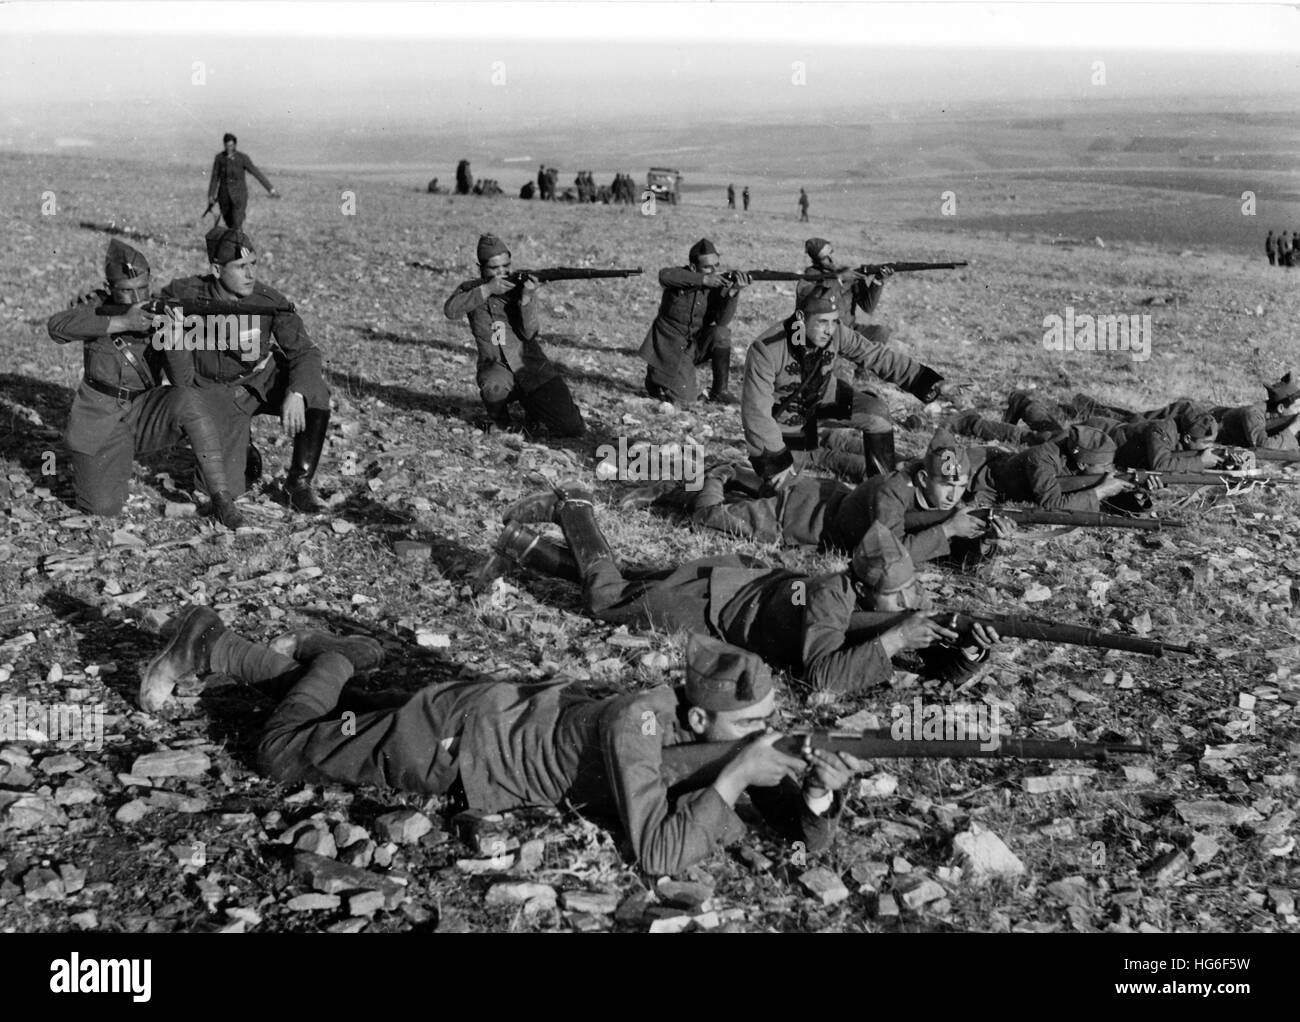 The Nazi propaganda picture shows the training of new recruits of Francos troops in Salamanca, Spain, December 1936. Fotoarchiv für Zeitgeschichtee - NO WIRE SERVICE - | usage worldwide Stock Photo